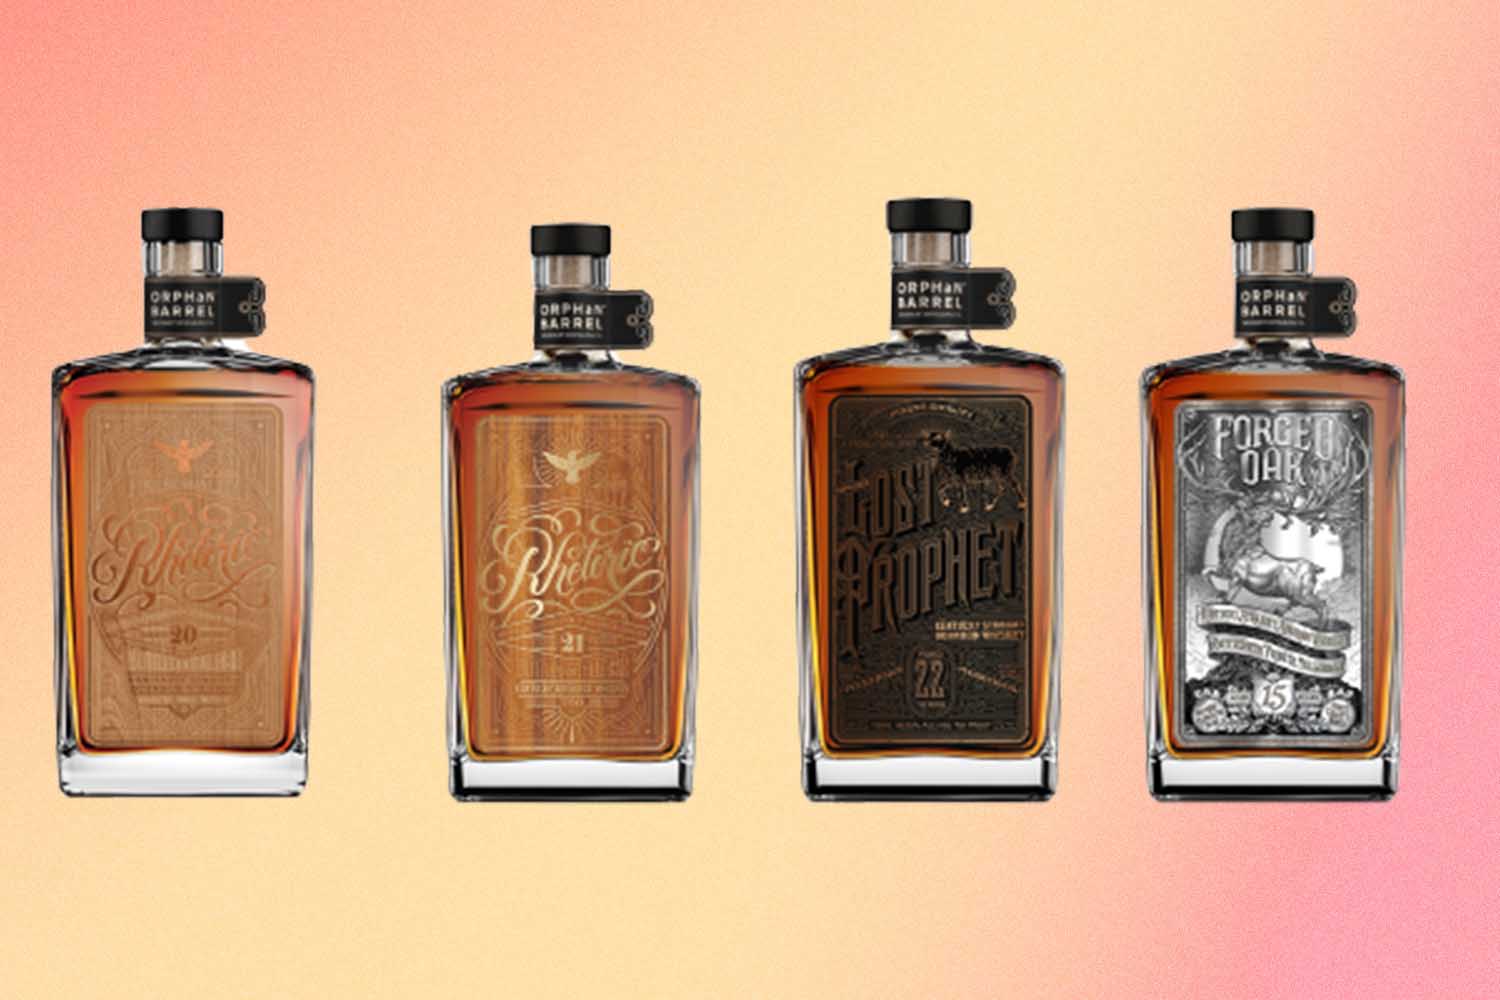 A selection of whiskey from Orphan Barrel